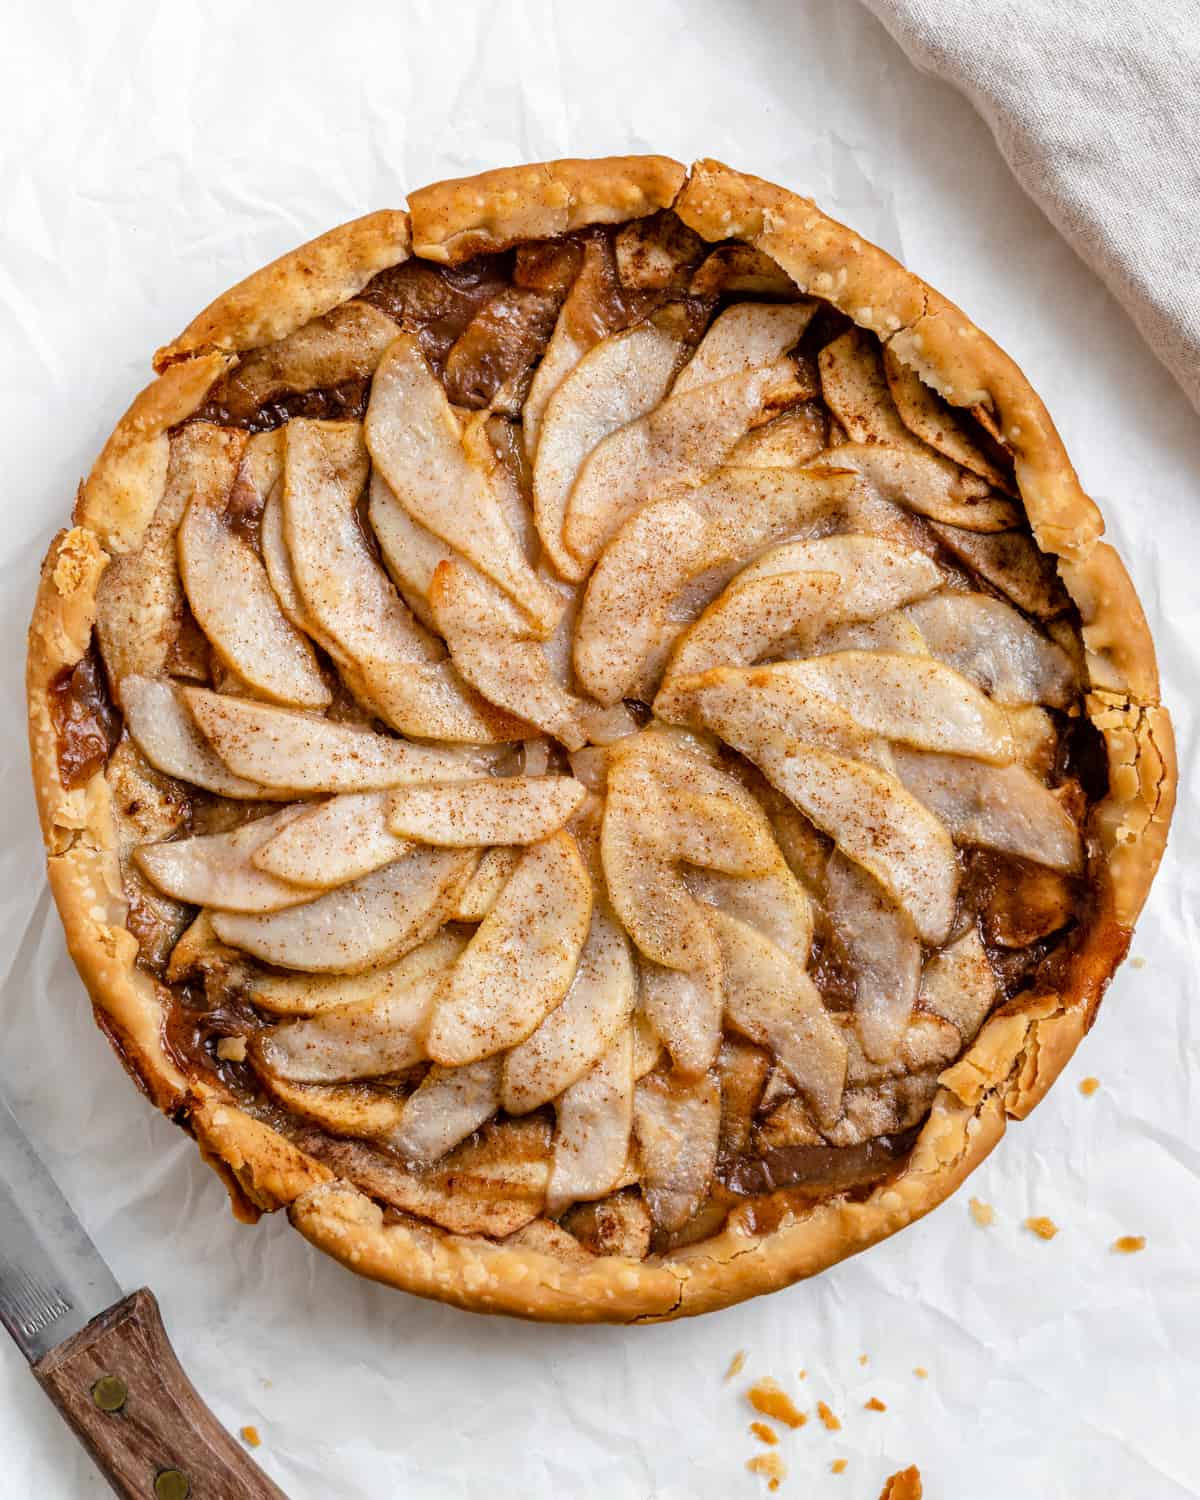 completed Easy Apple Pear Pie against a white surface